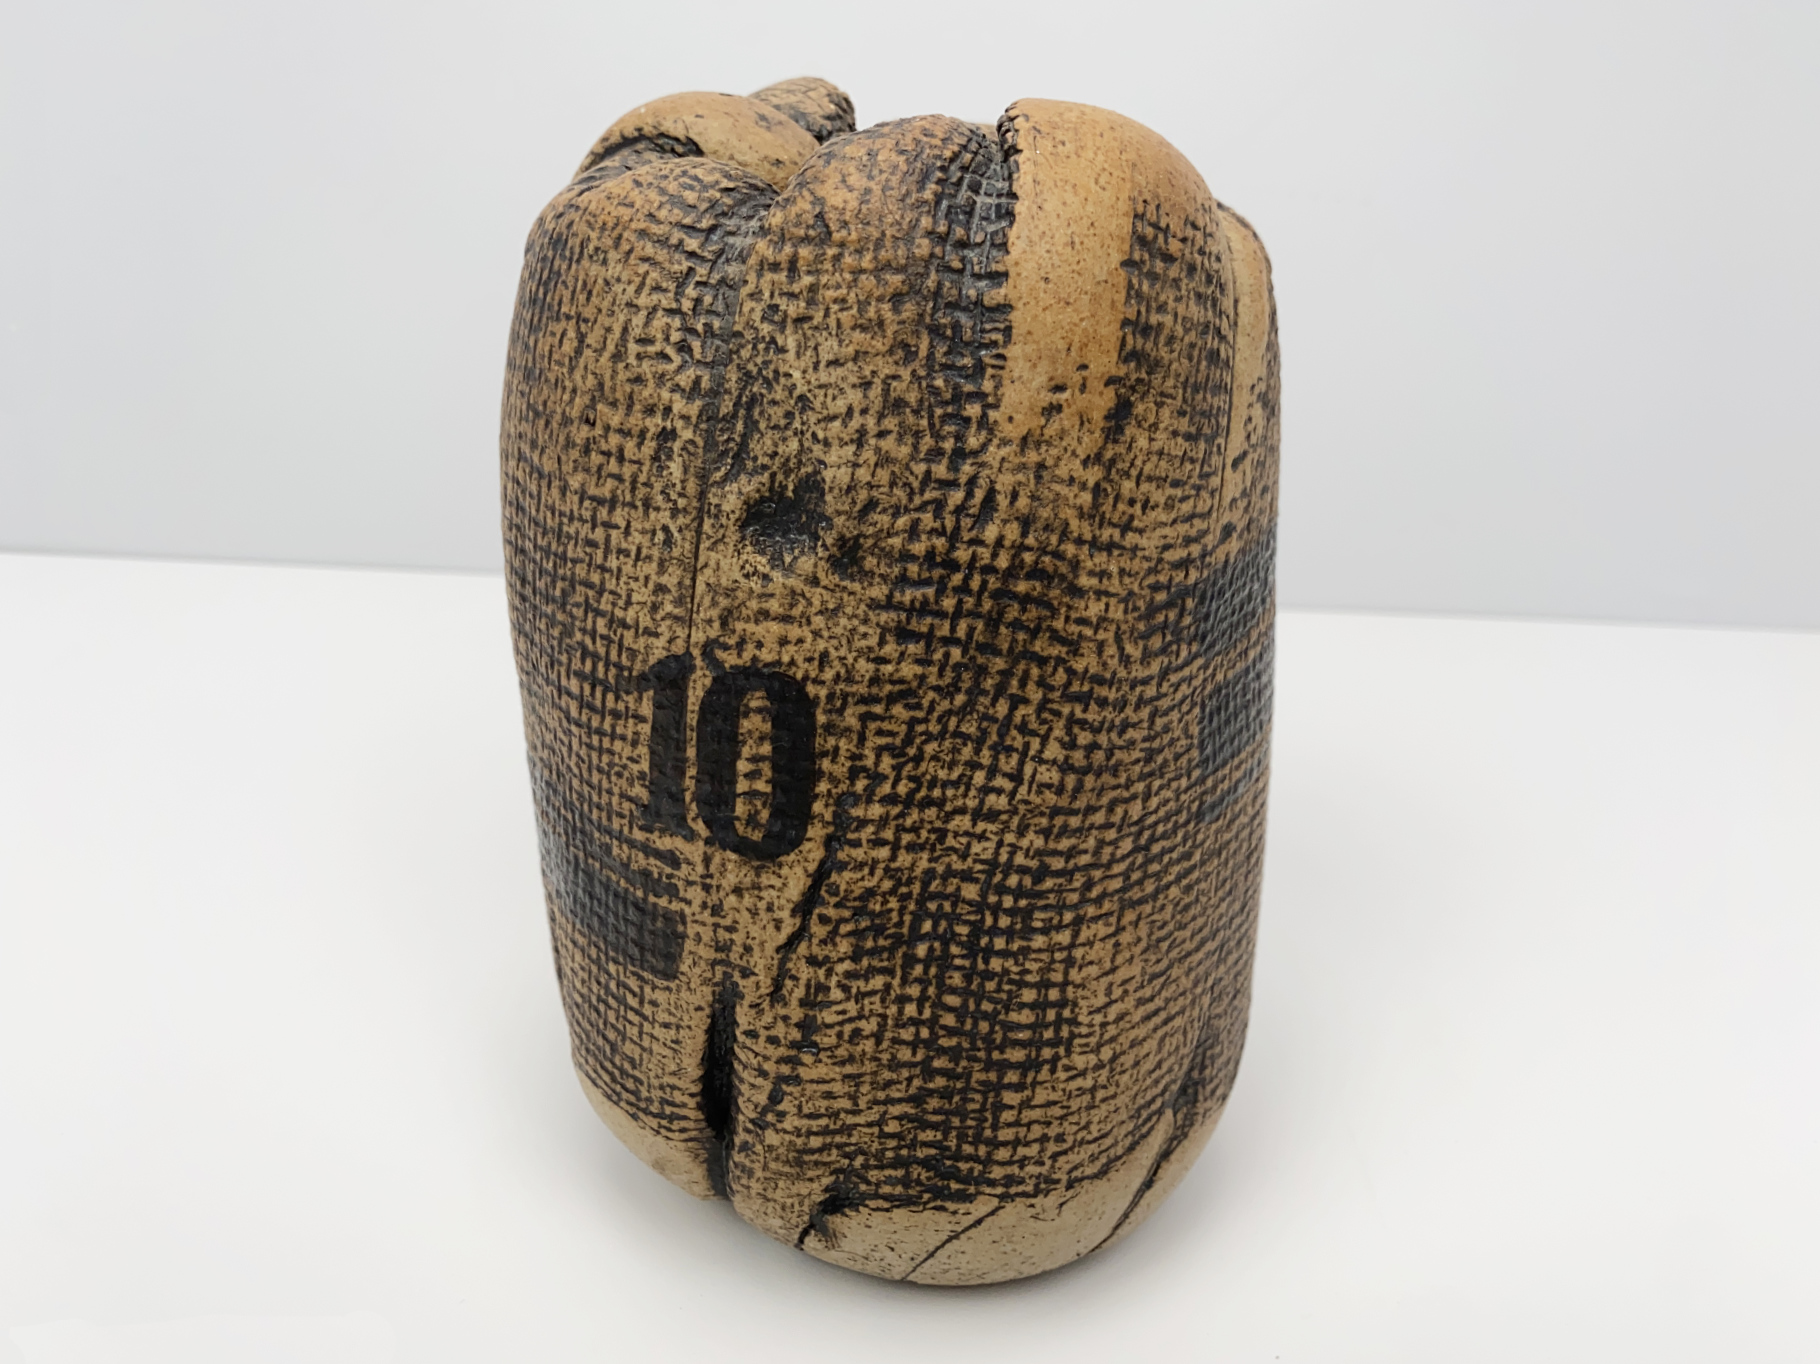 Brown Vase, Stoneware, shaped and painted with Cloth, ca 1975